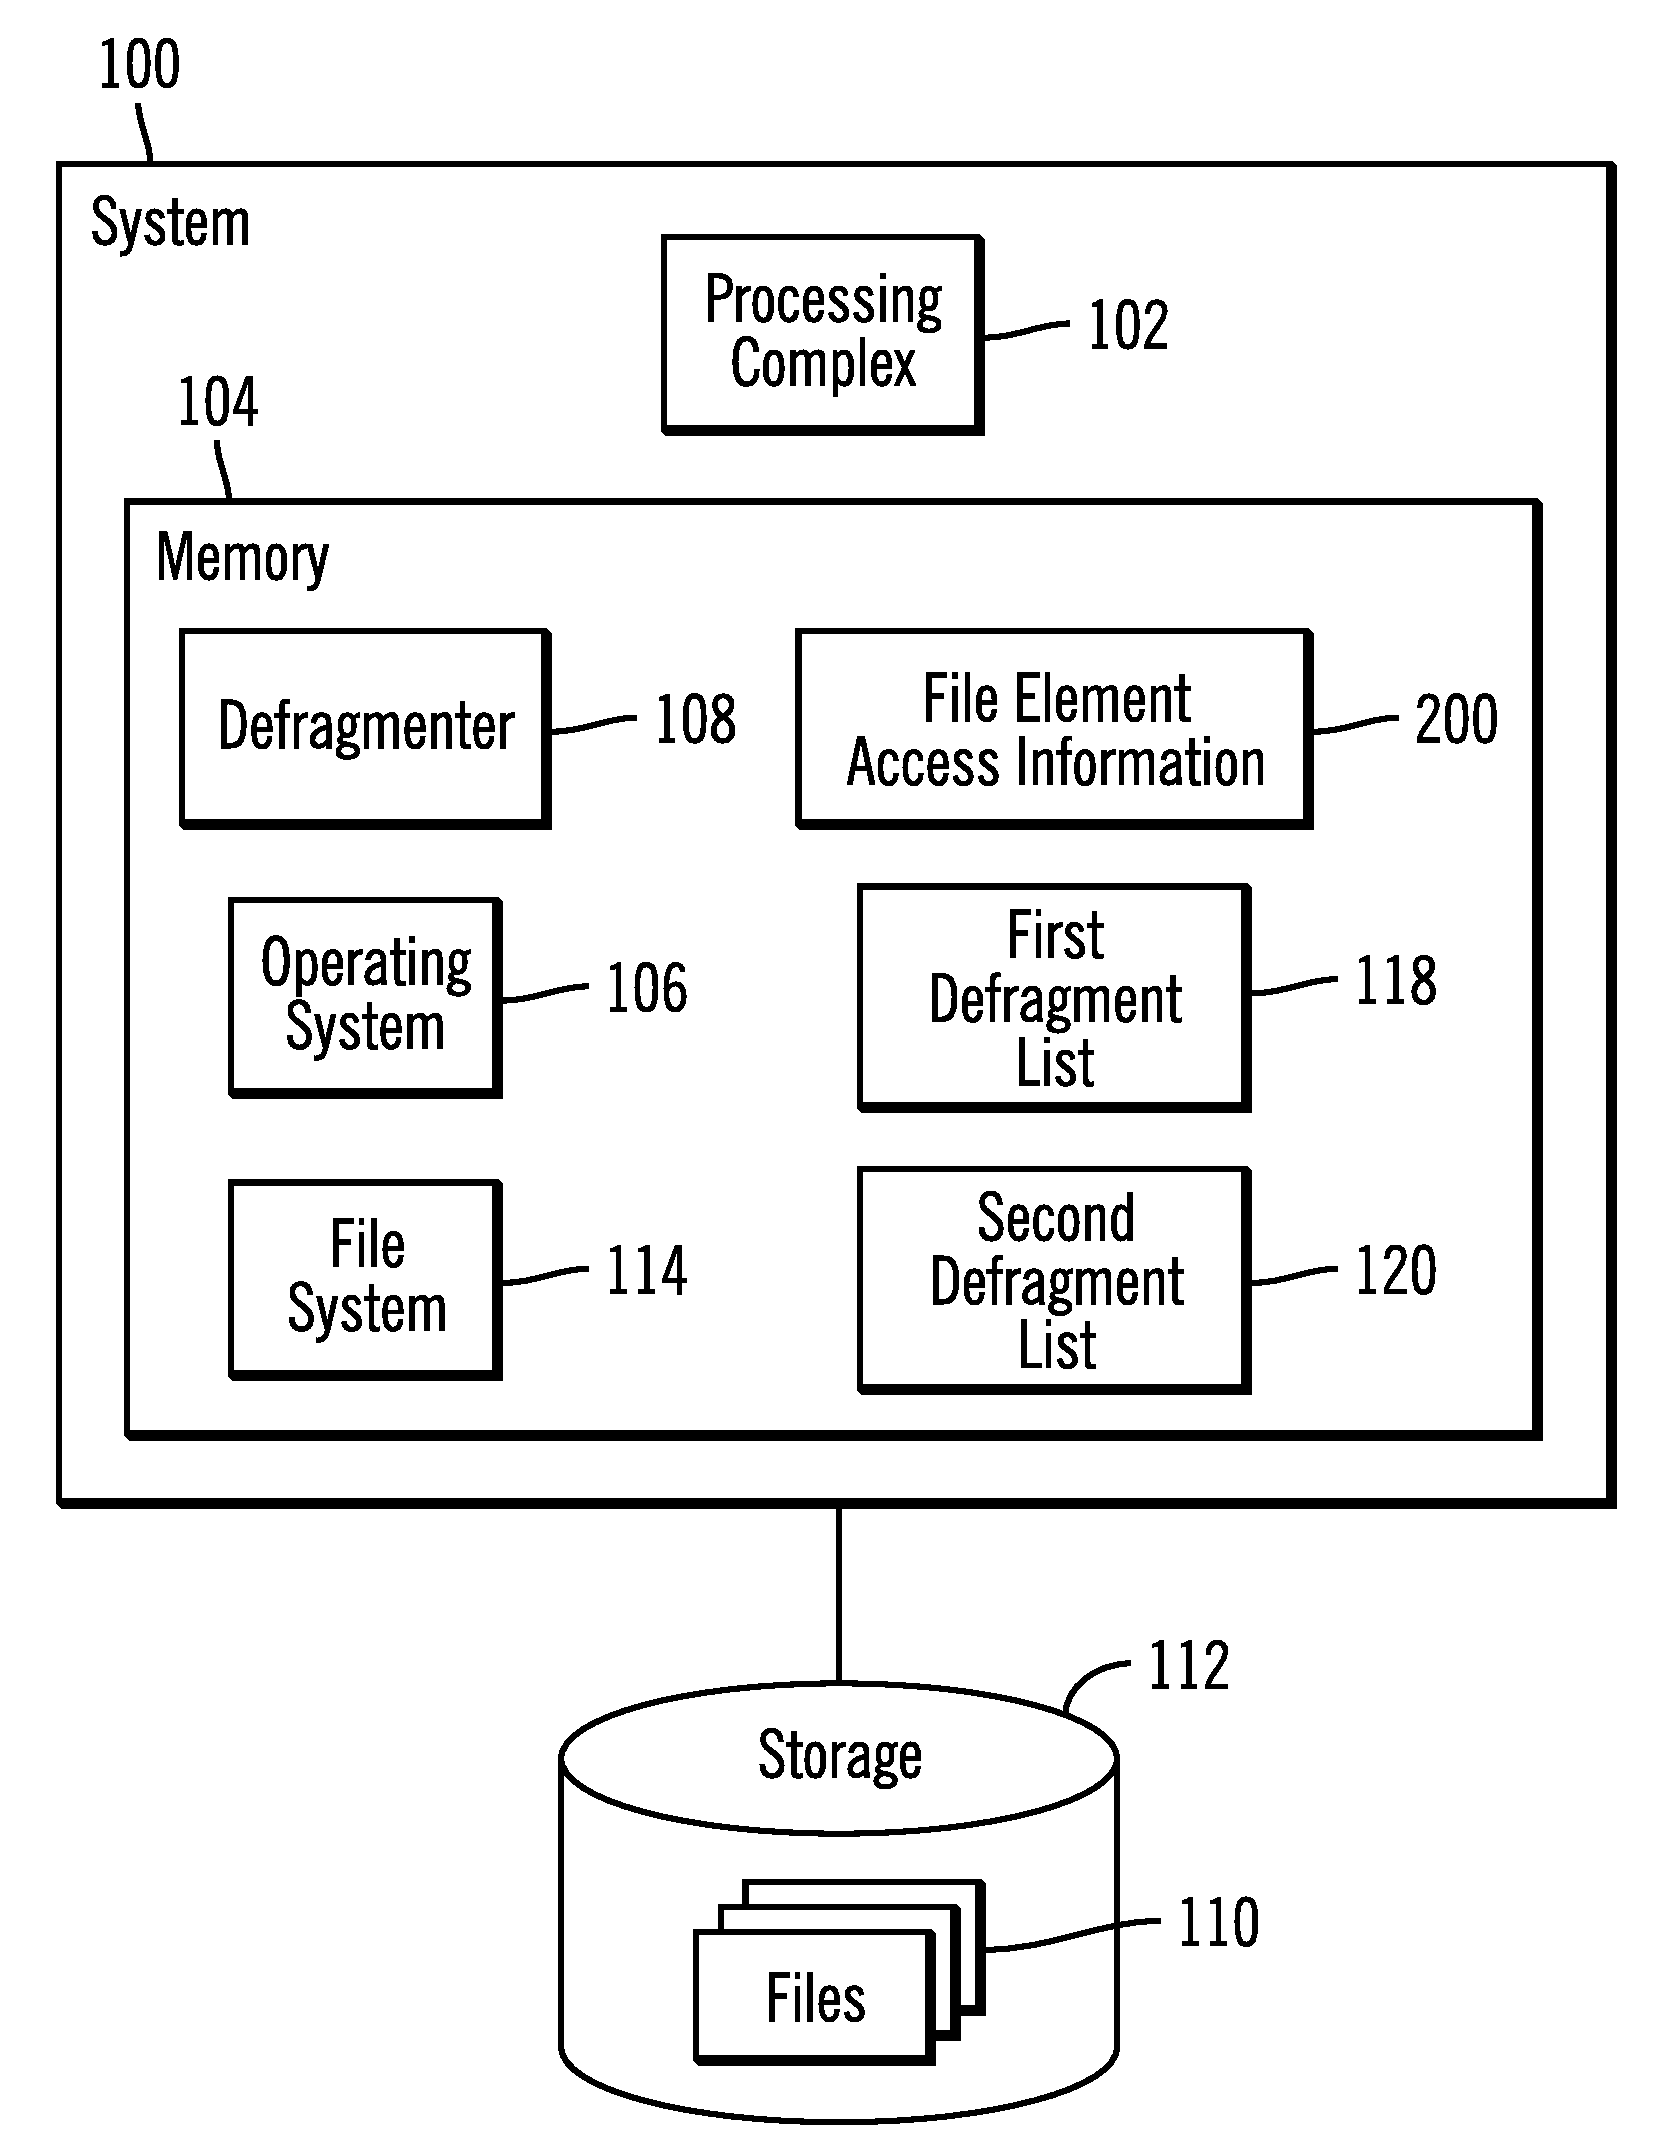 Using file element accesses to select file elements in a file system to defragment